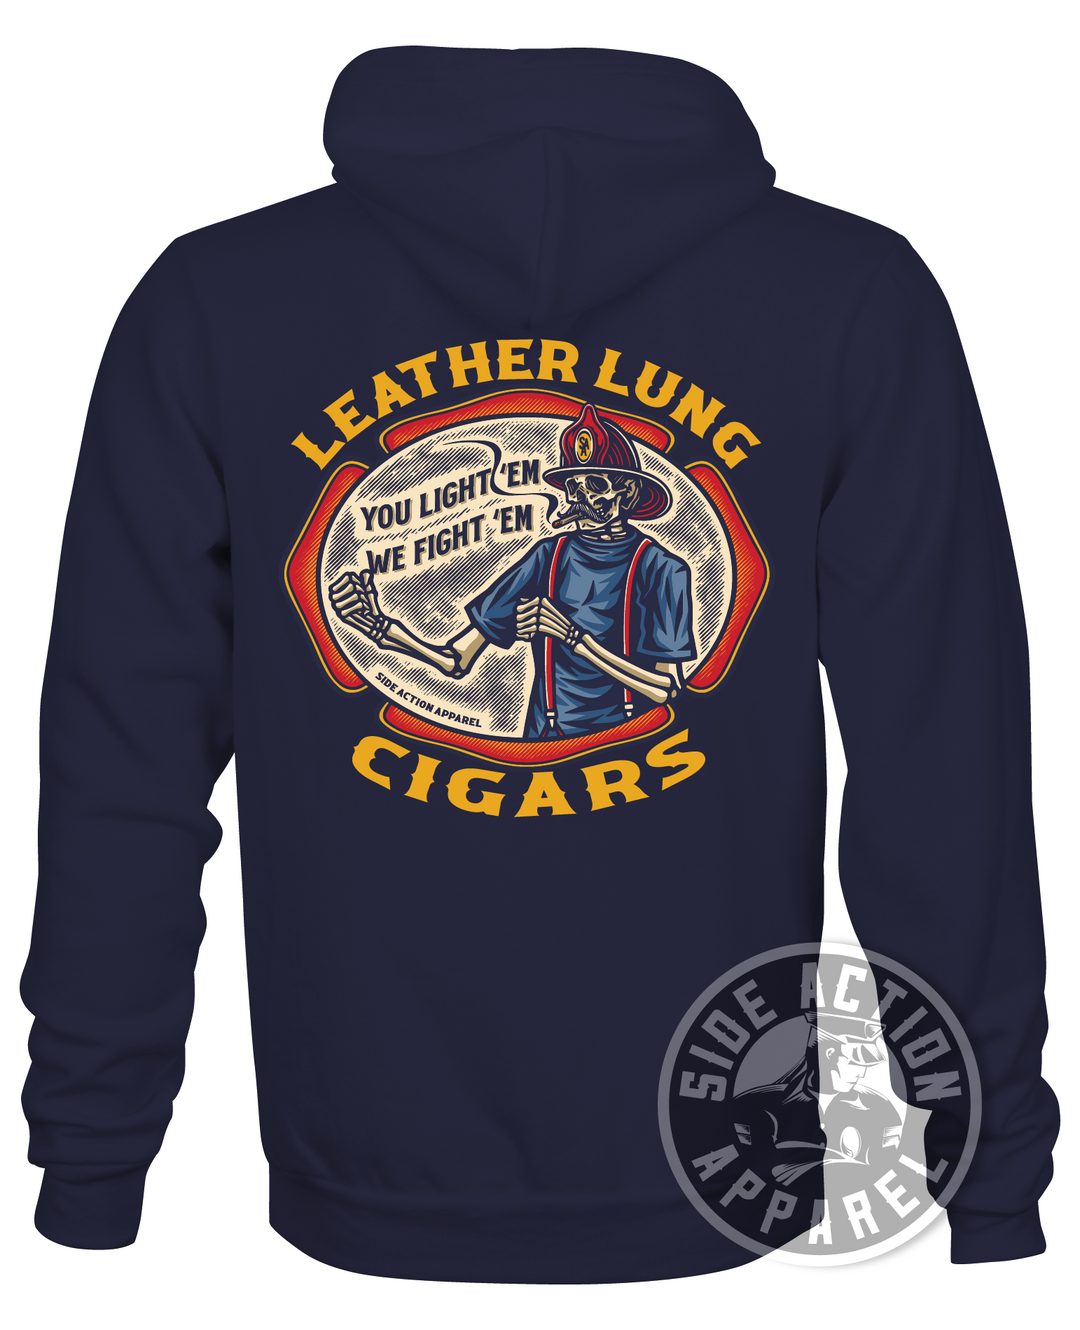 Hoodie - Leather Lung Cigars